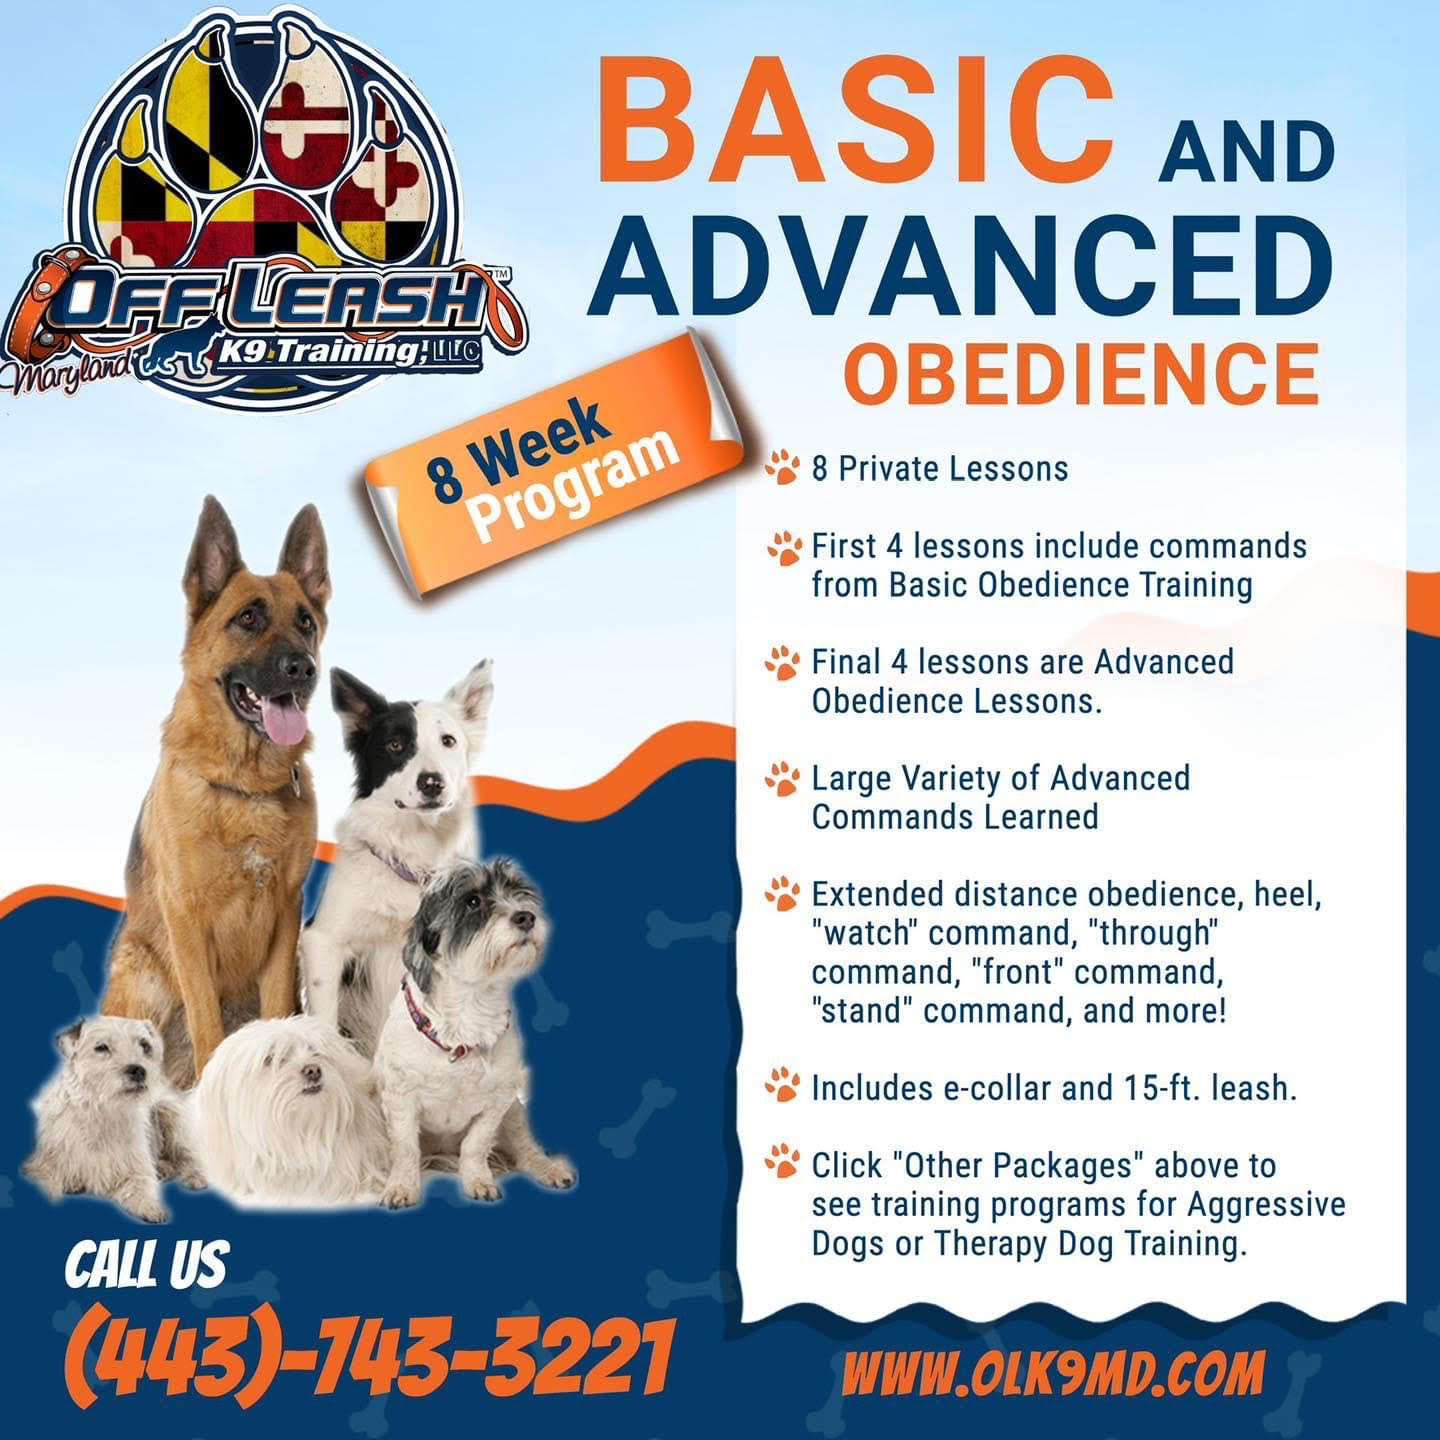 basic and advanced obedience training for dogs graphic